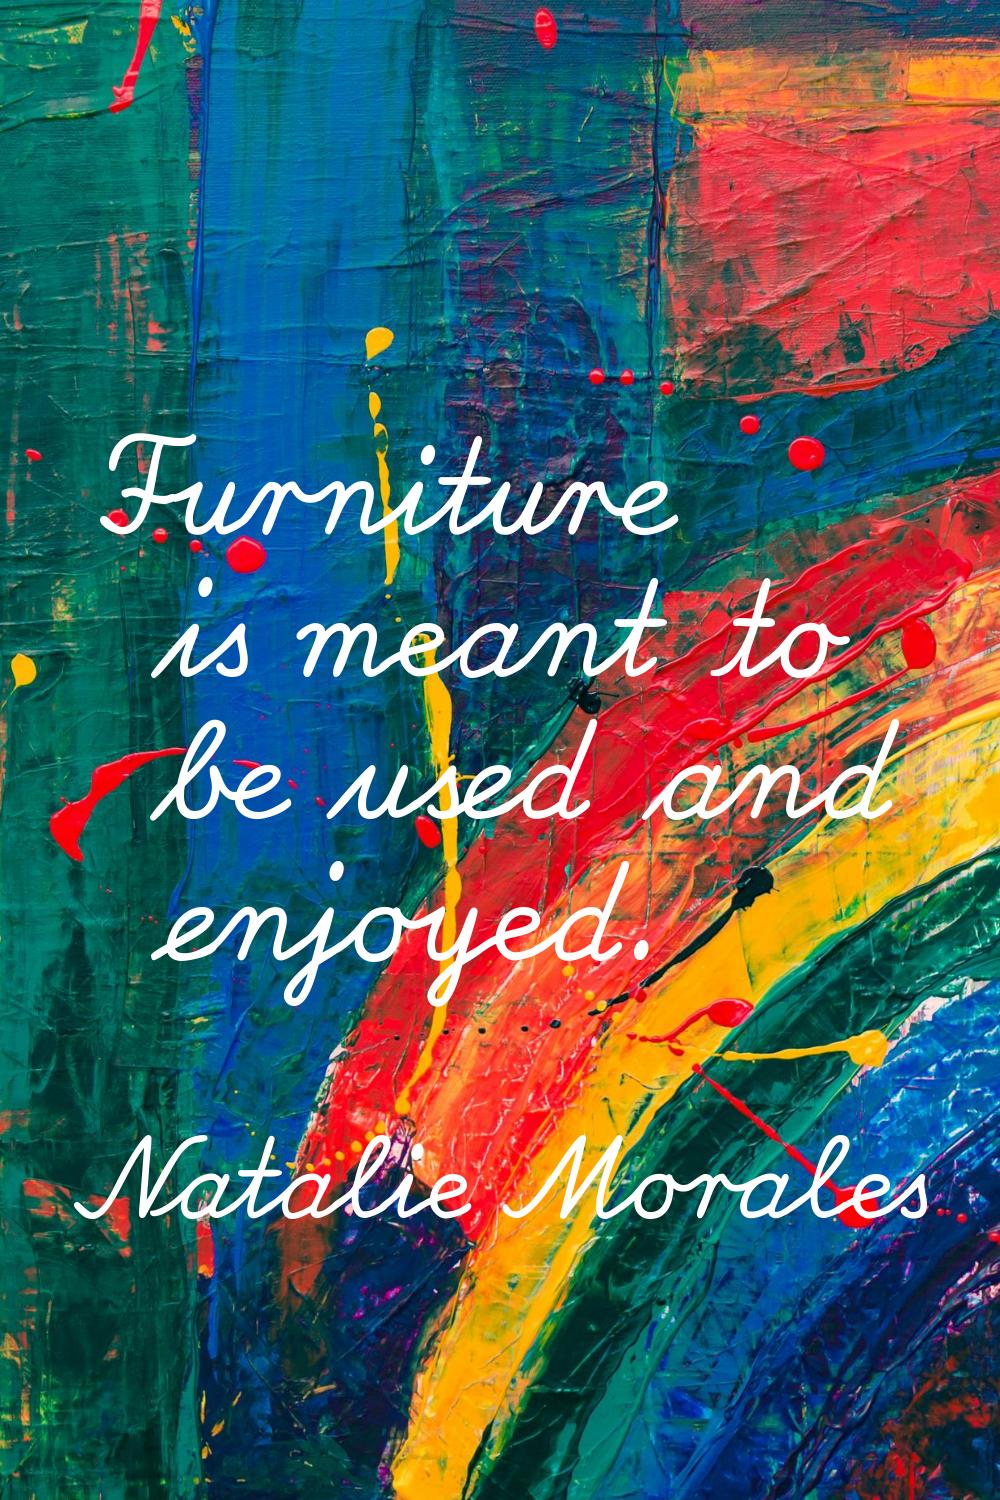 Furniture is meant to be used and enjoyed.